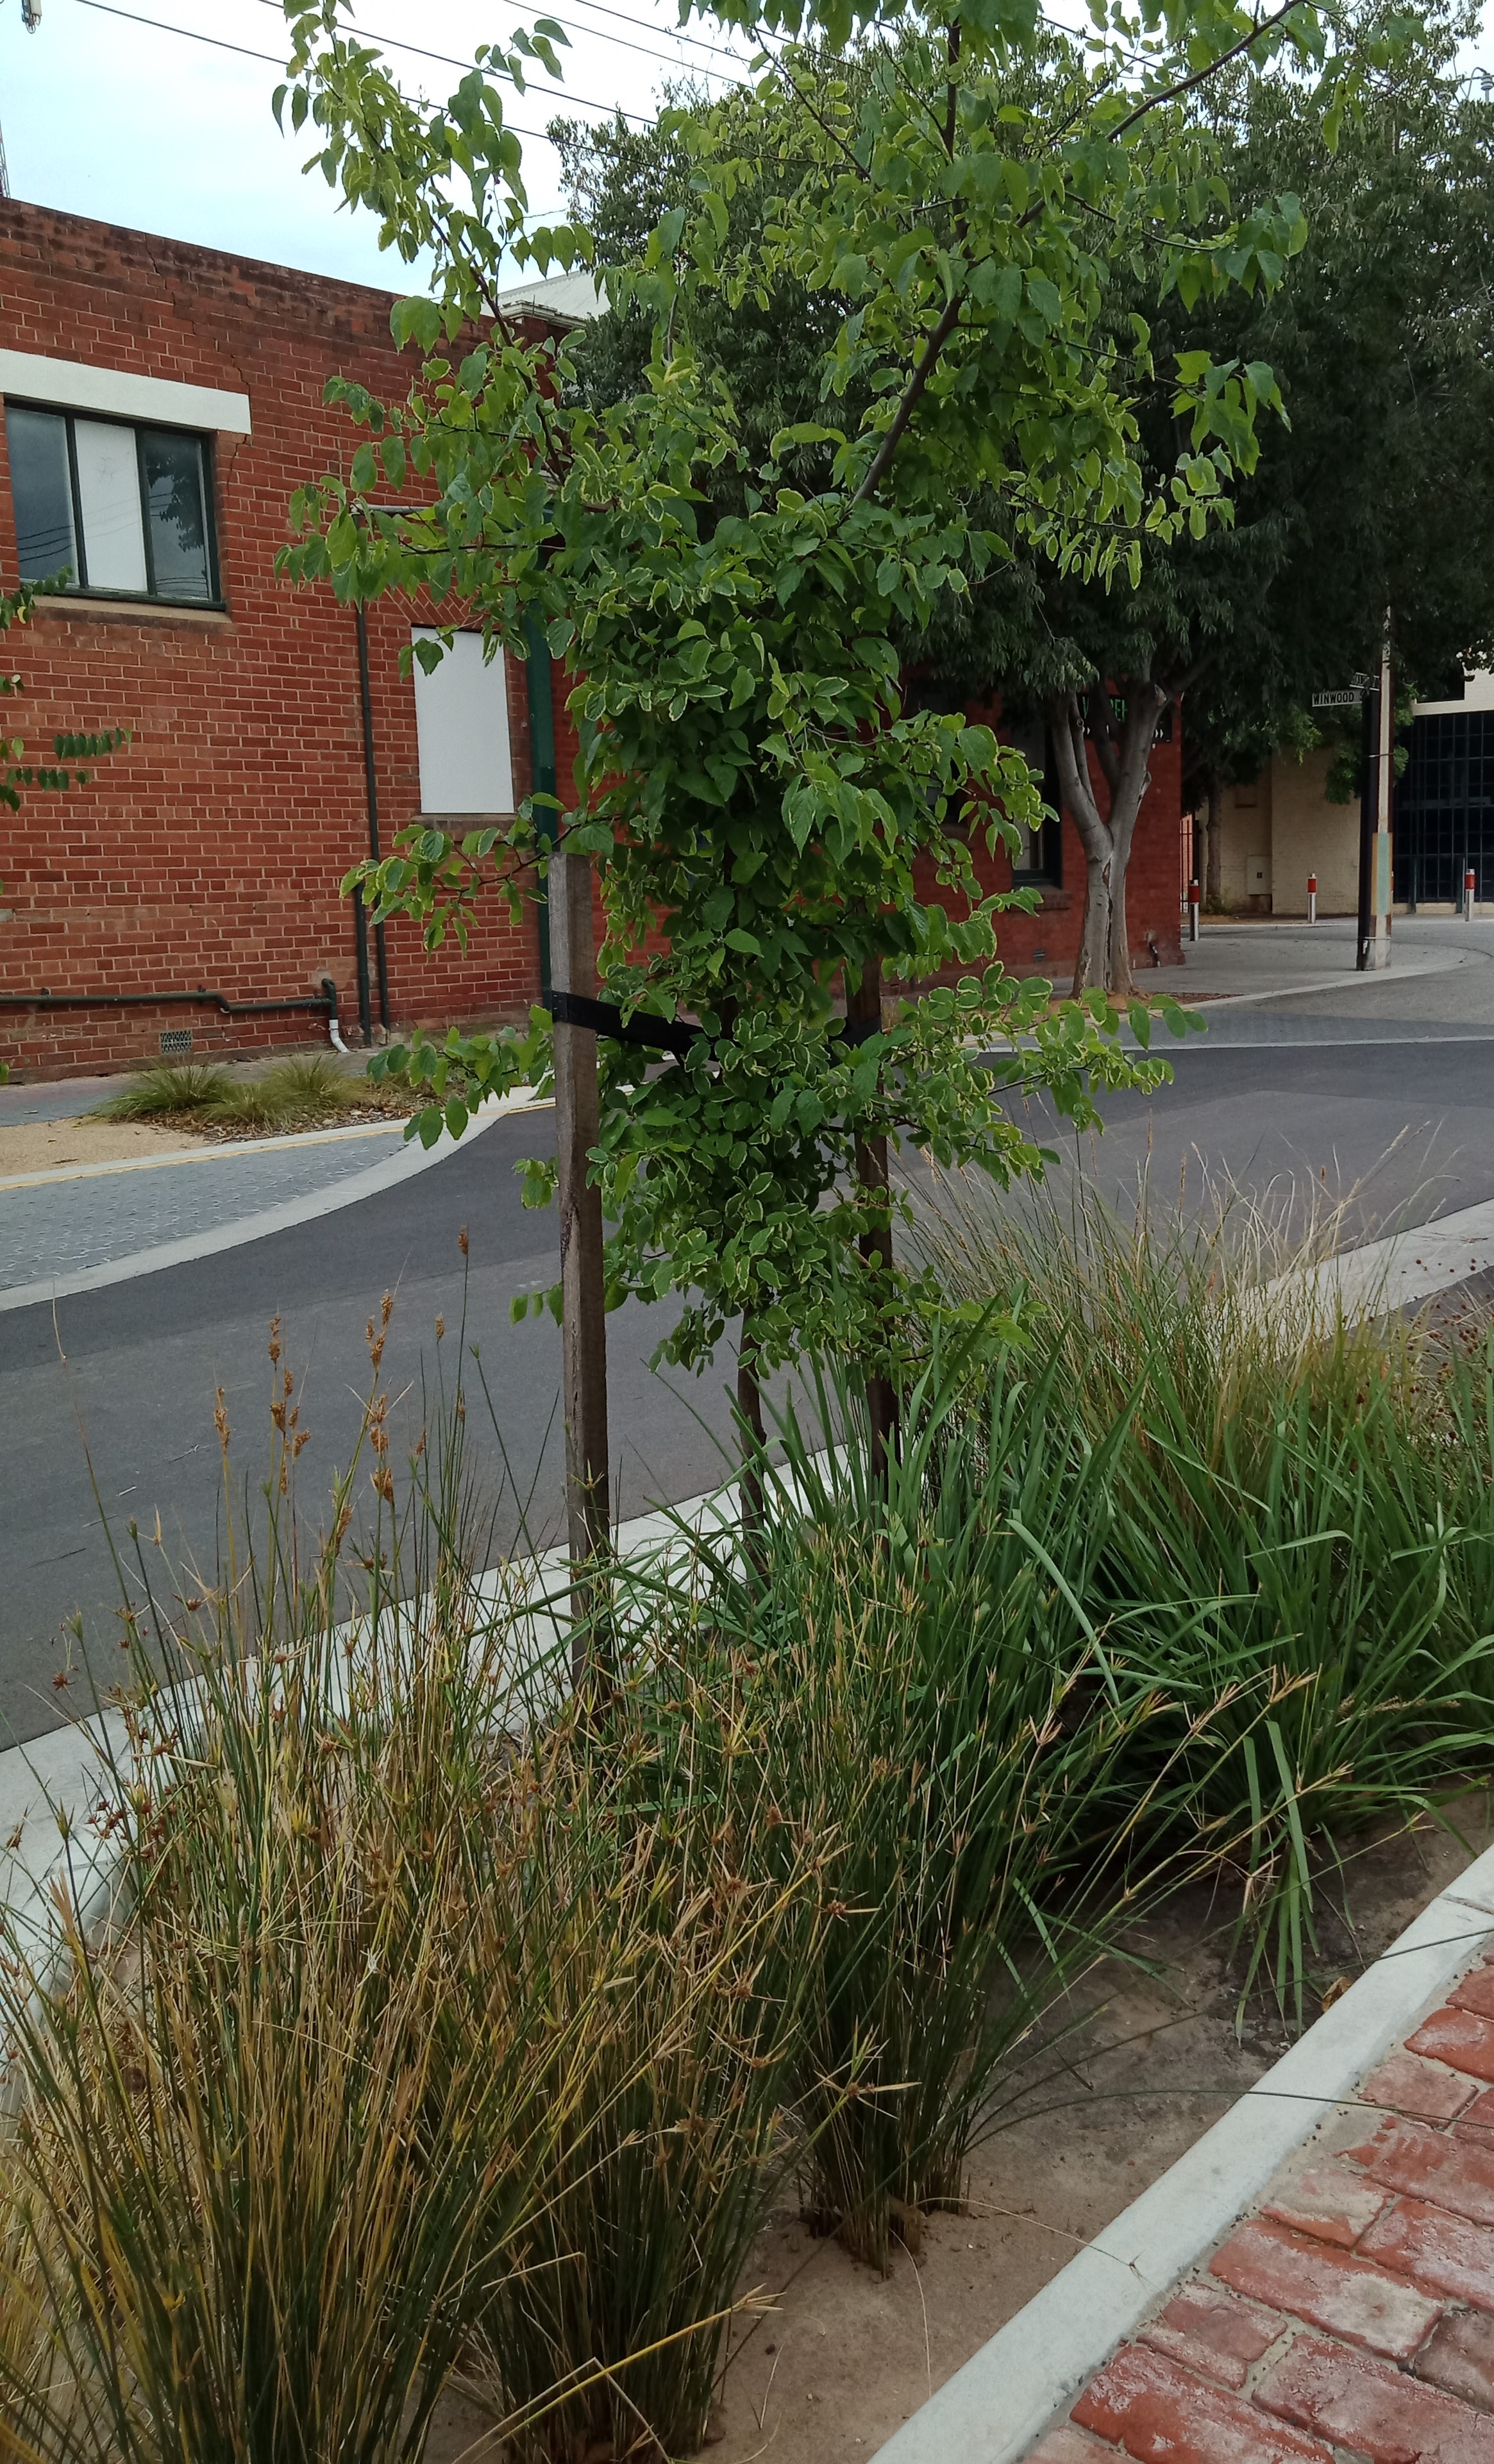 Council has established many raingardens along streets in West Torrens. The raingardens are designed to capture and filter stormwater runoff, whilst providing a source of water for growing road-side vegetation. An online interactive trail to learn more about raingardens is on Council's website.